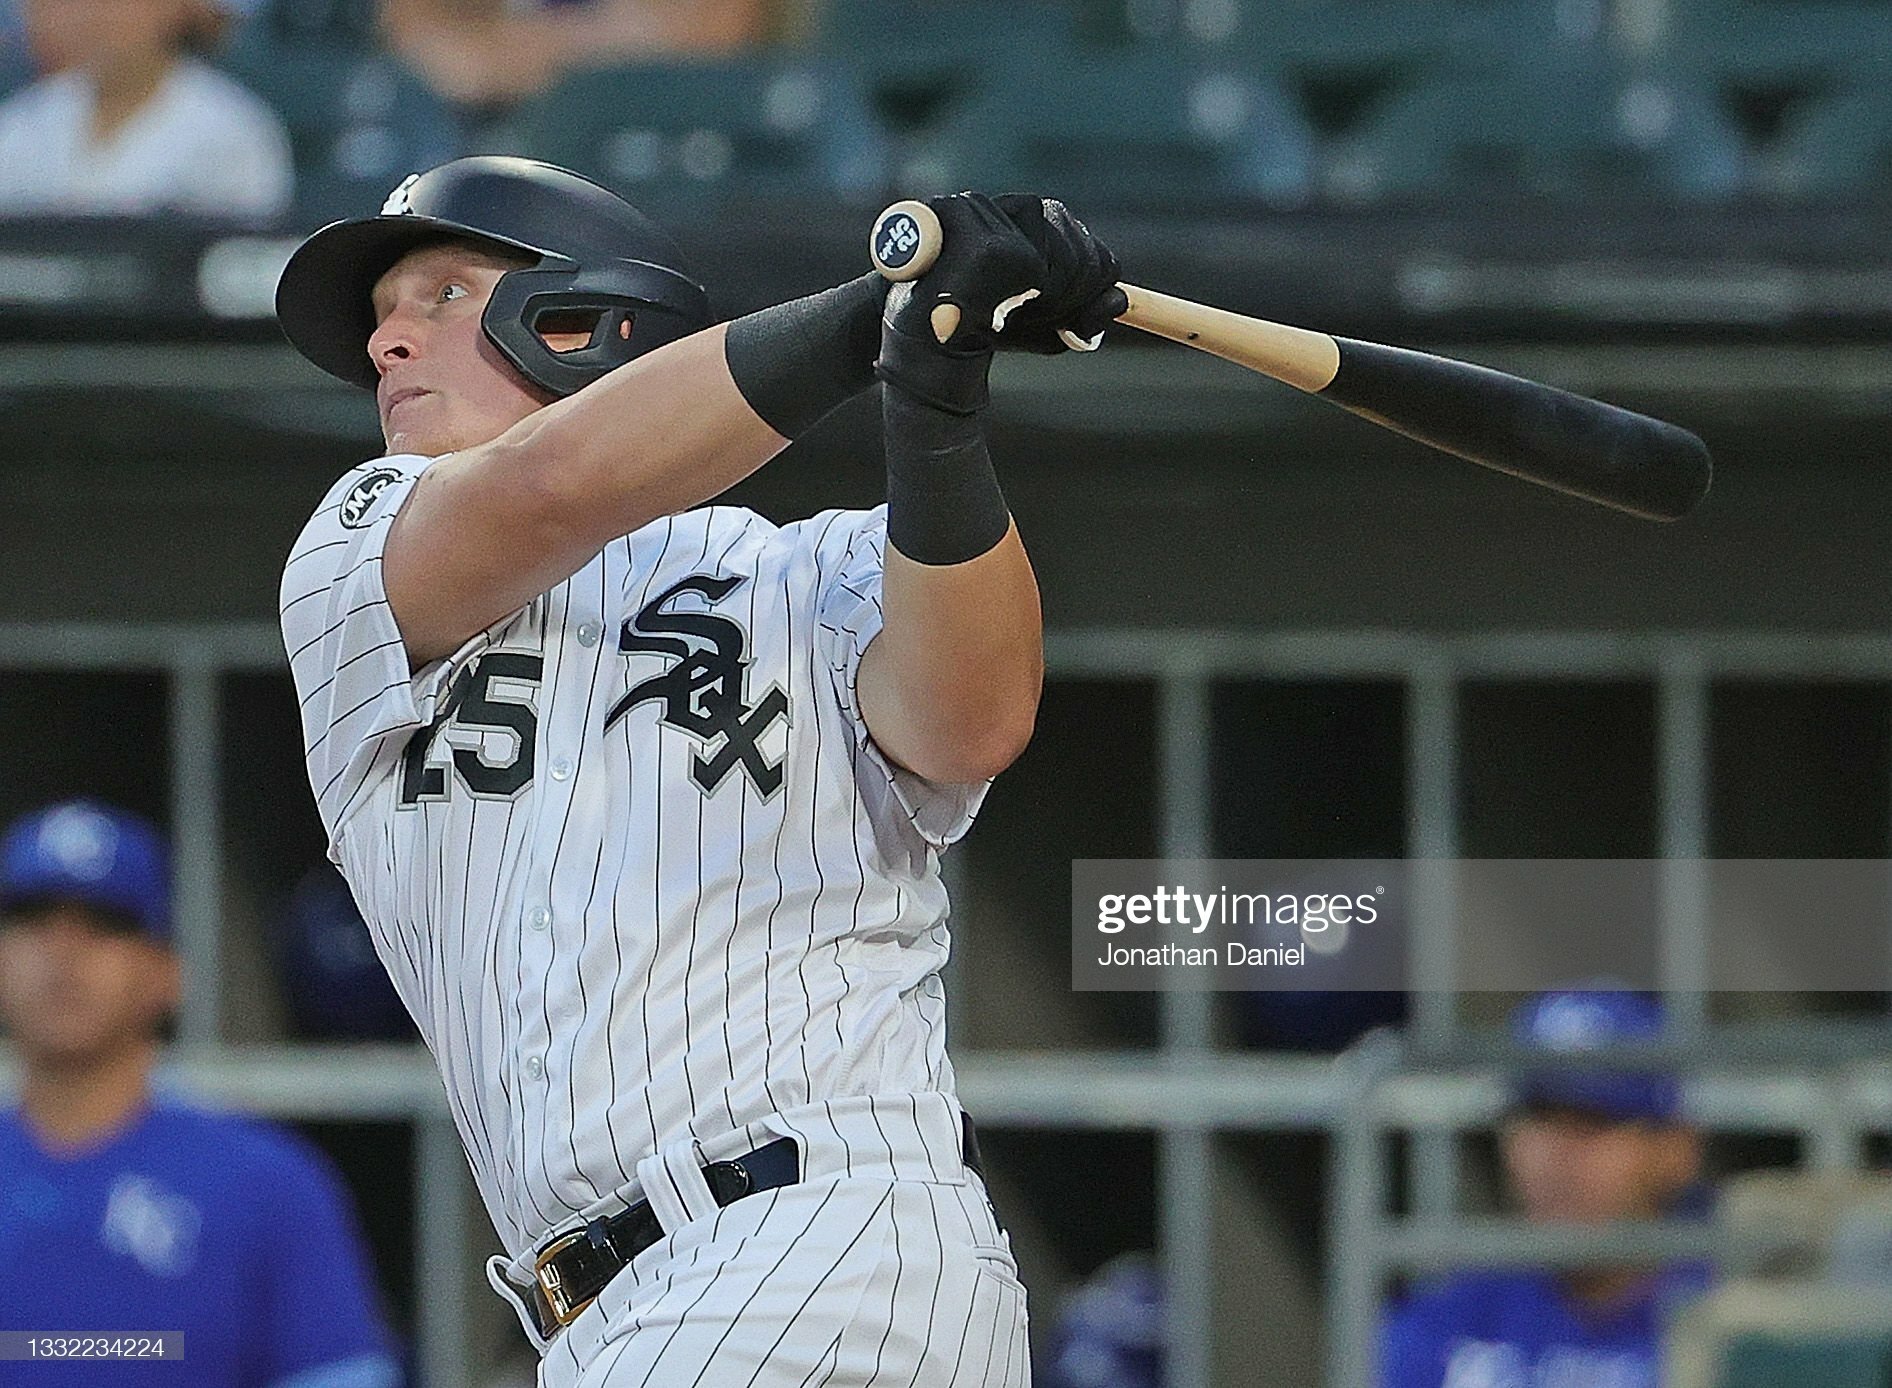 White Sox First Baseman Andrew Vaughn is 'ready to play all 162